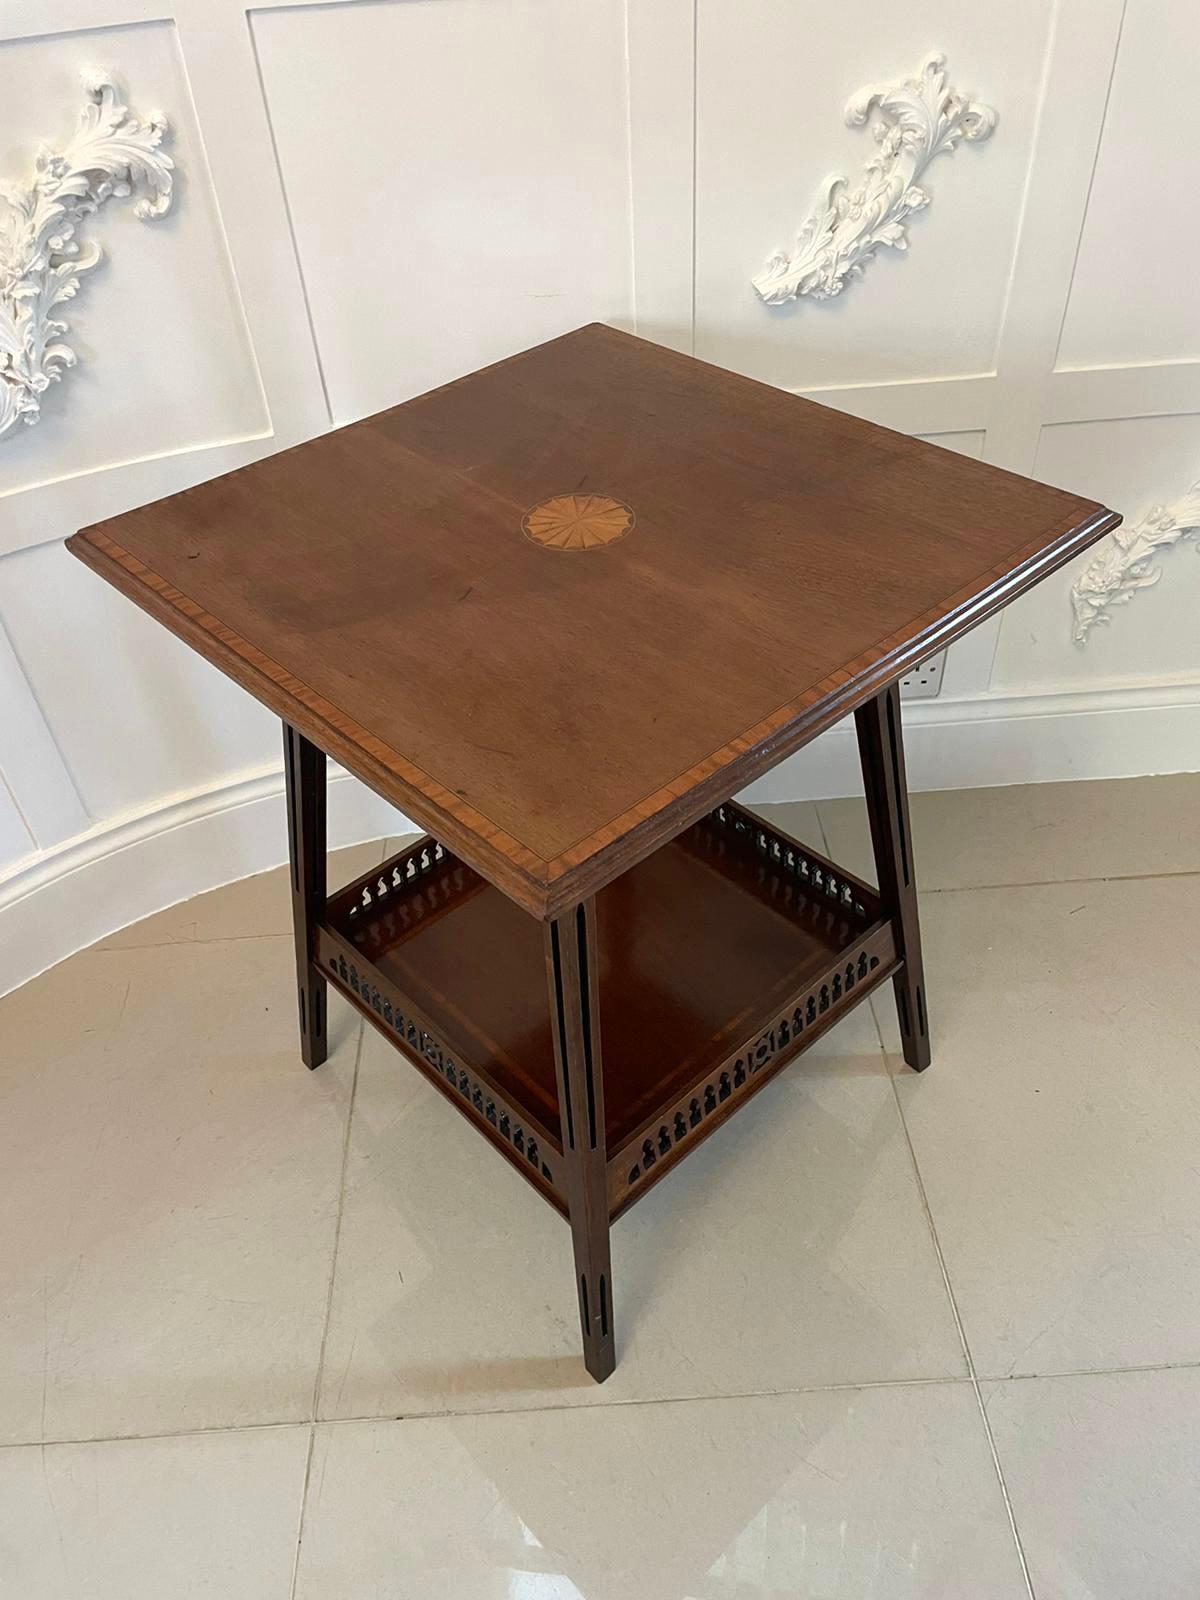 Antique Edwardian quality mahogany inlaid centre table having a quality mahogany top crossbanded in satinwood with a satinwood inlaid shell to the centre, mahogany frieze standing on four square tapering legs with carved pierced fretwork united by a